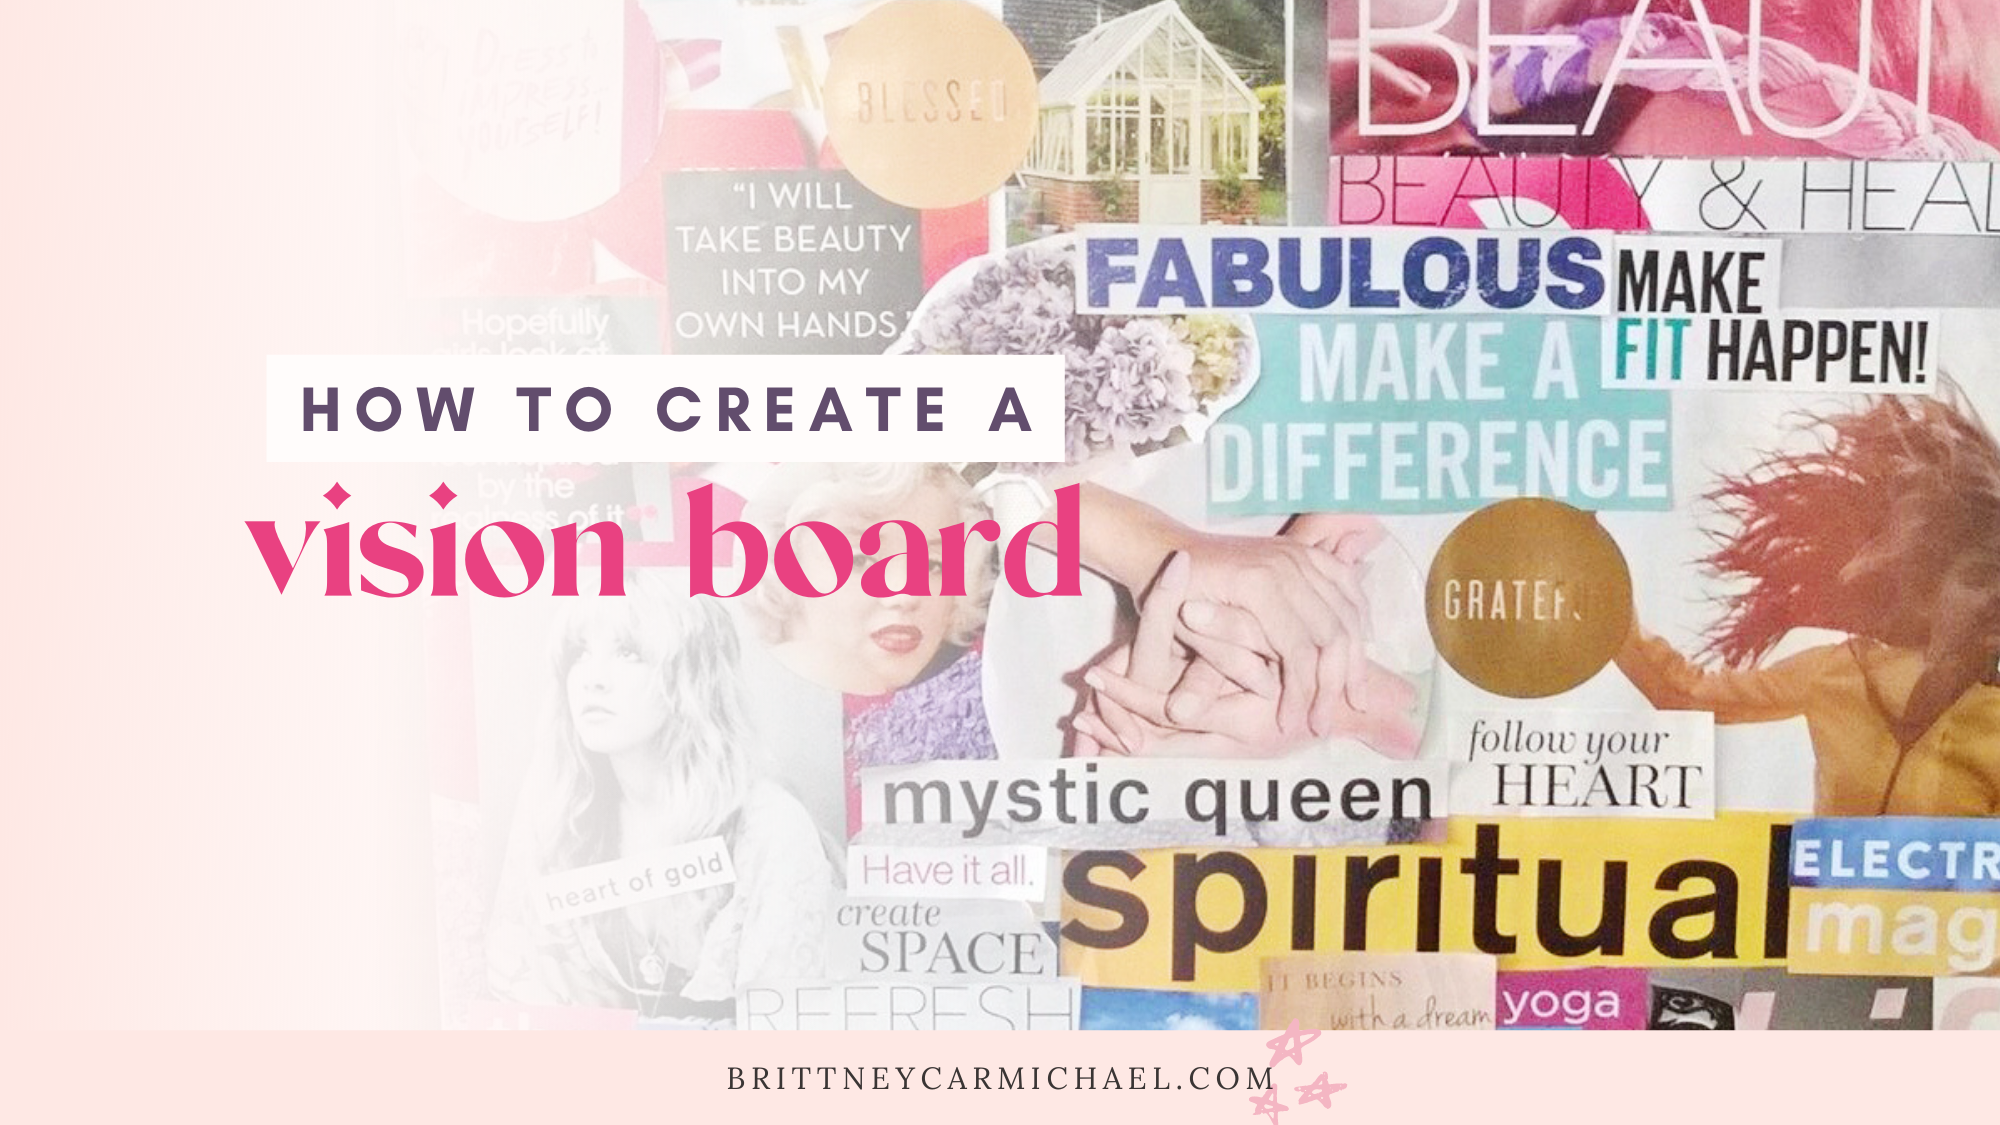 How to Create a Vision Board to Manifest your Dreams - Brittney Carmichael